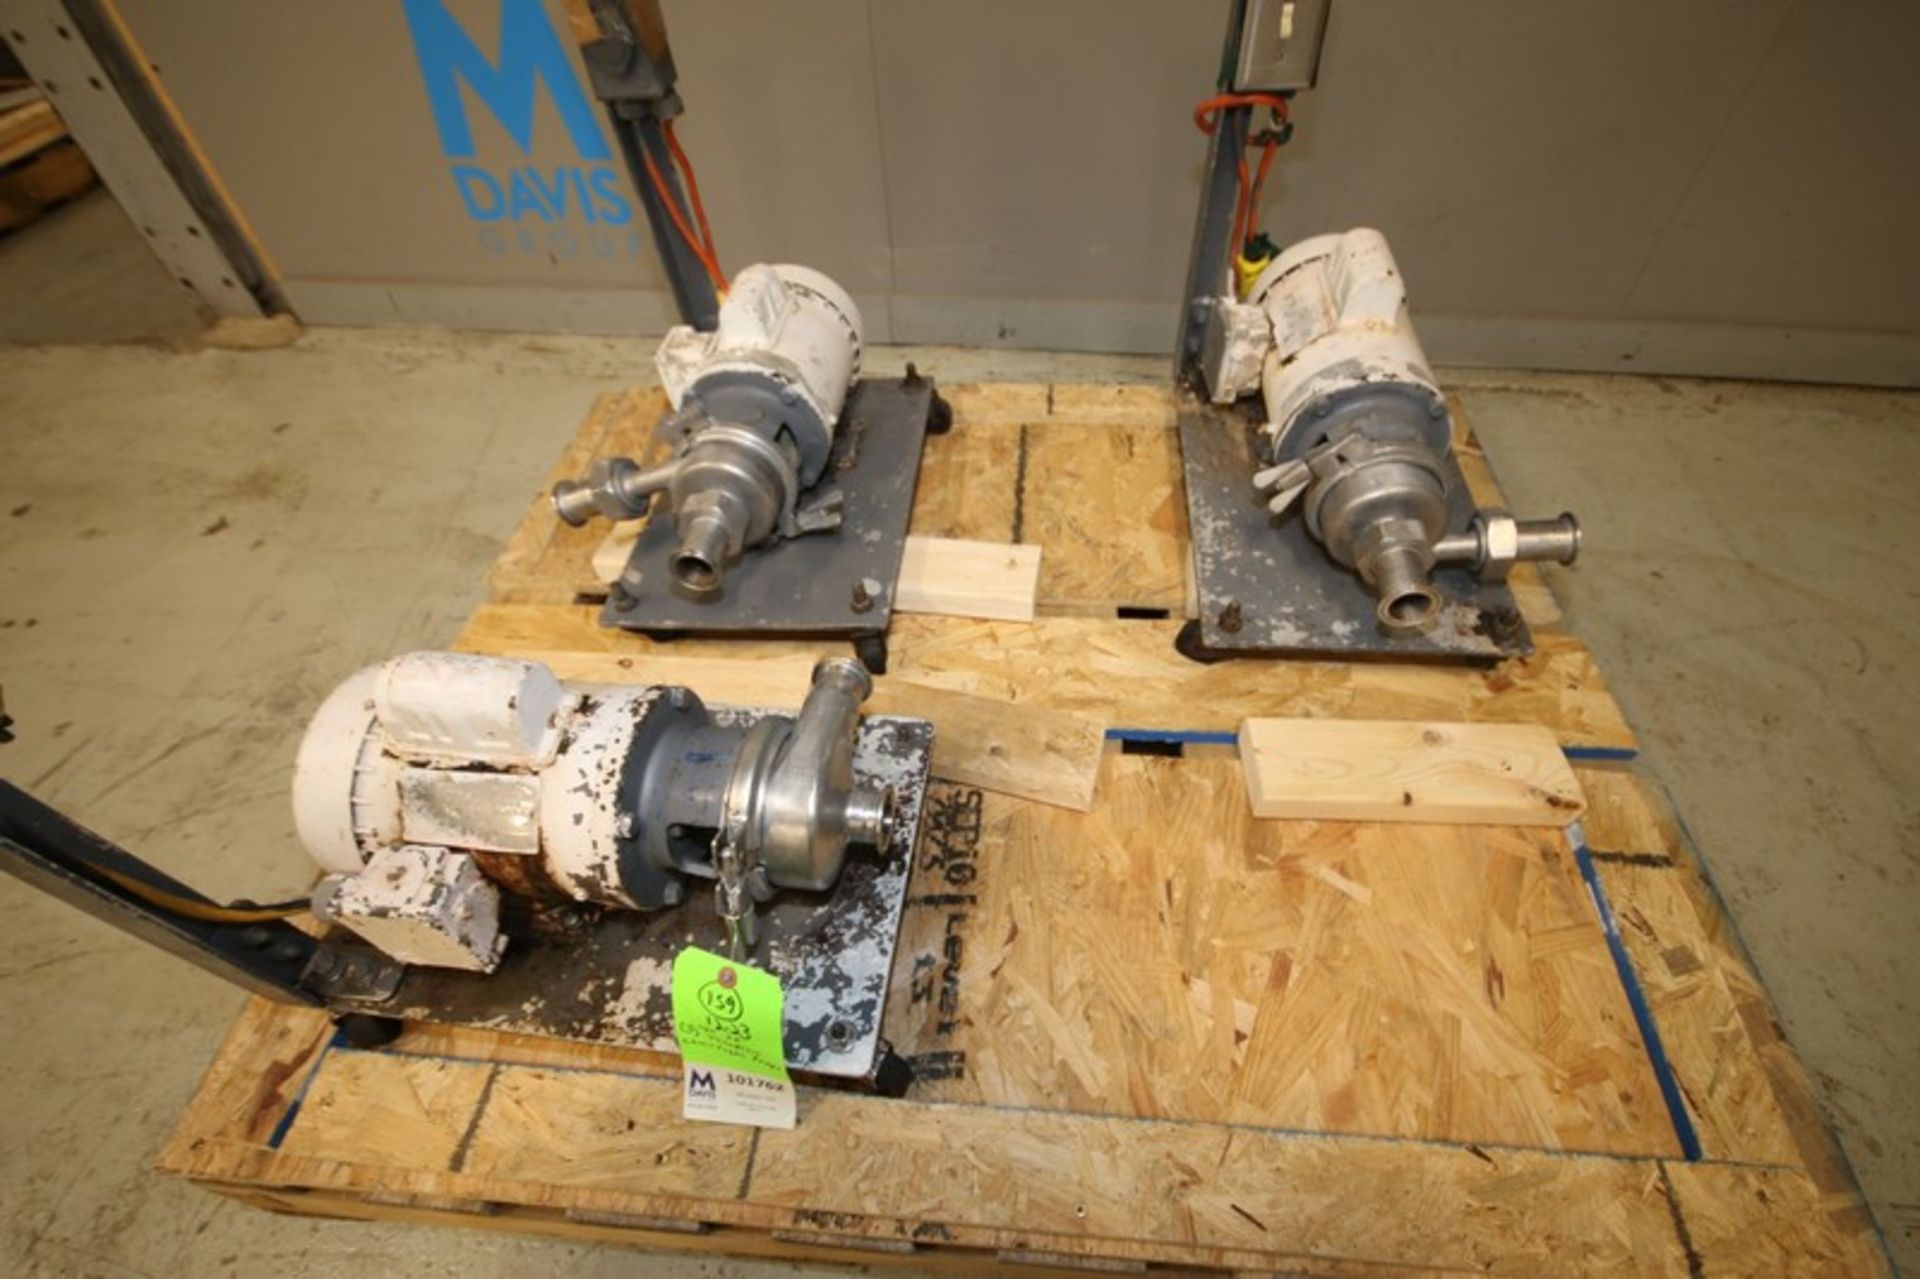 Lot of (3) Thompson Centrifugal Pumps, with 1.5" Threaded & CT Heads, 1/2 hp / 1725 rpm Motors,